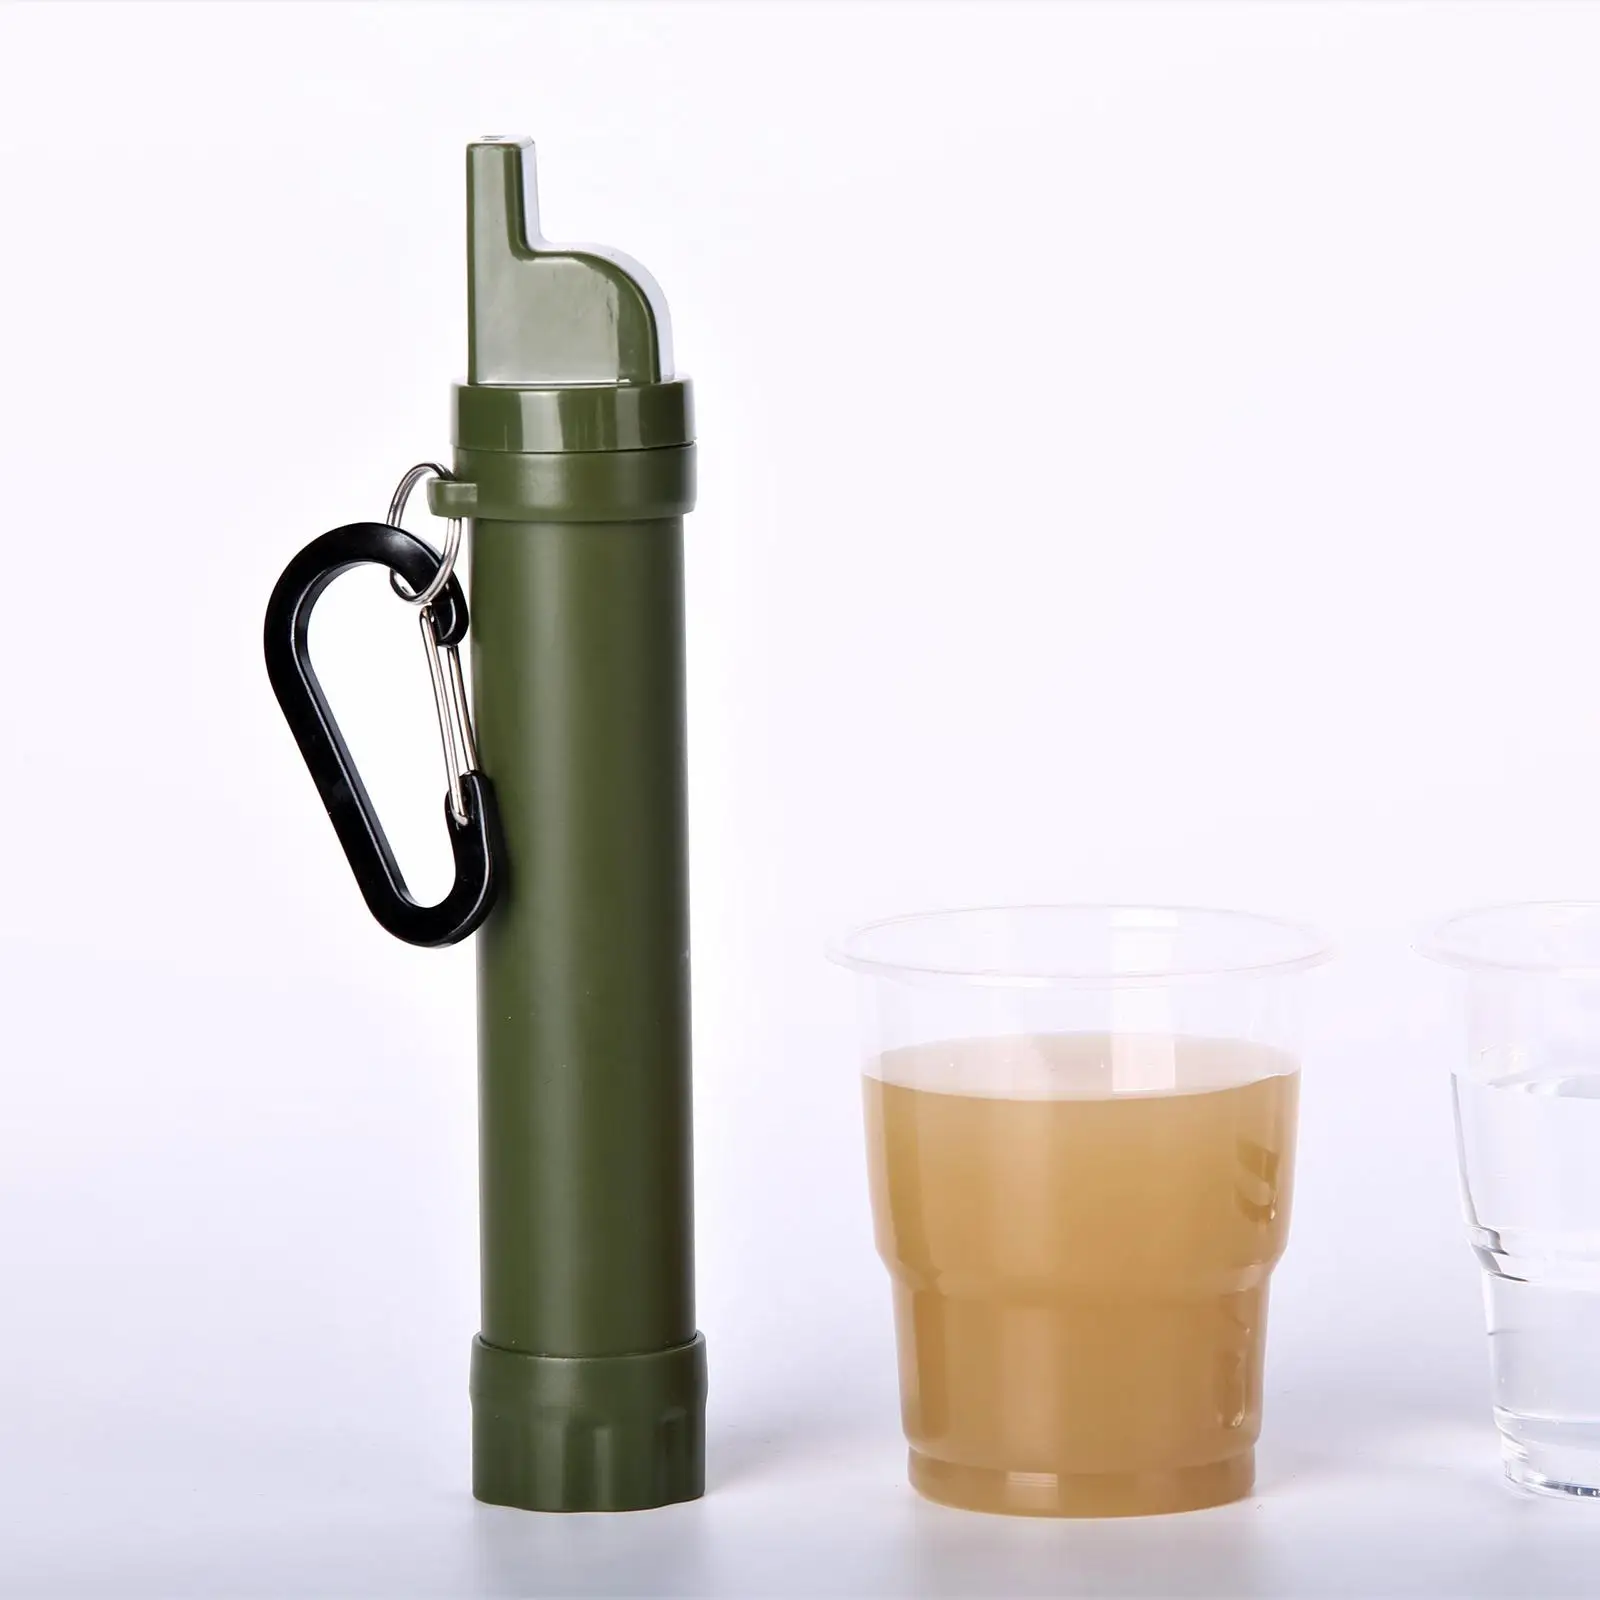 Portable Water Filter Straw Gear Water Purifier Camping Hiking Emergency Life Survival Tool